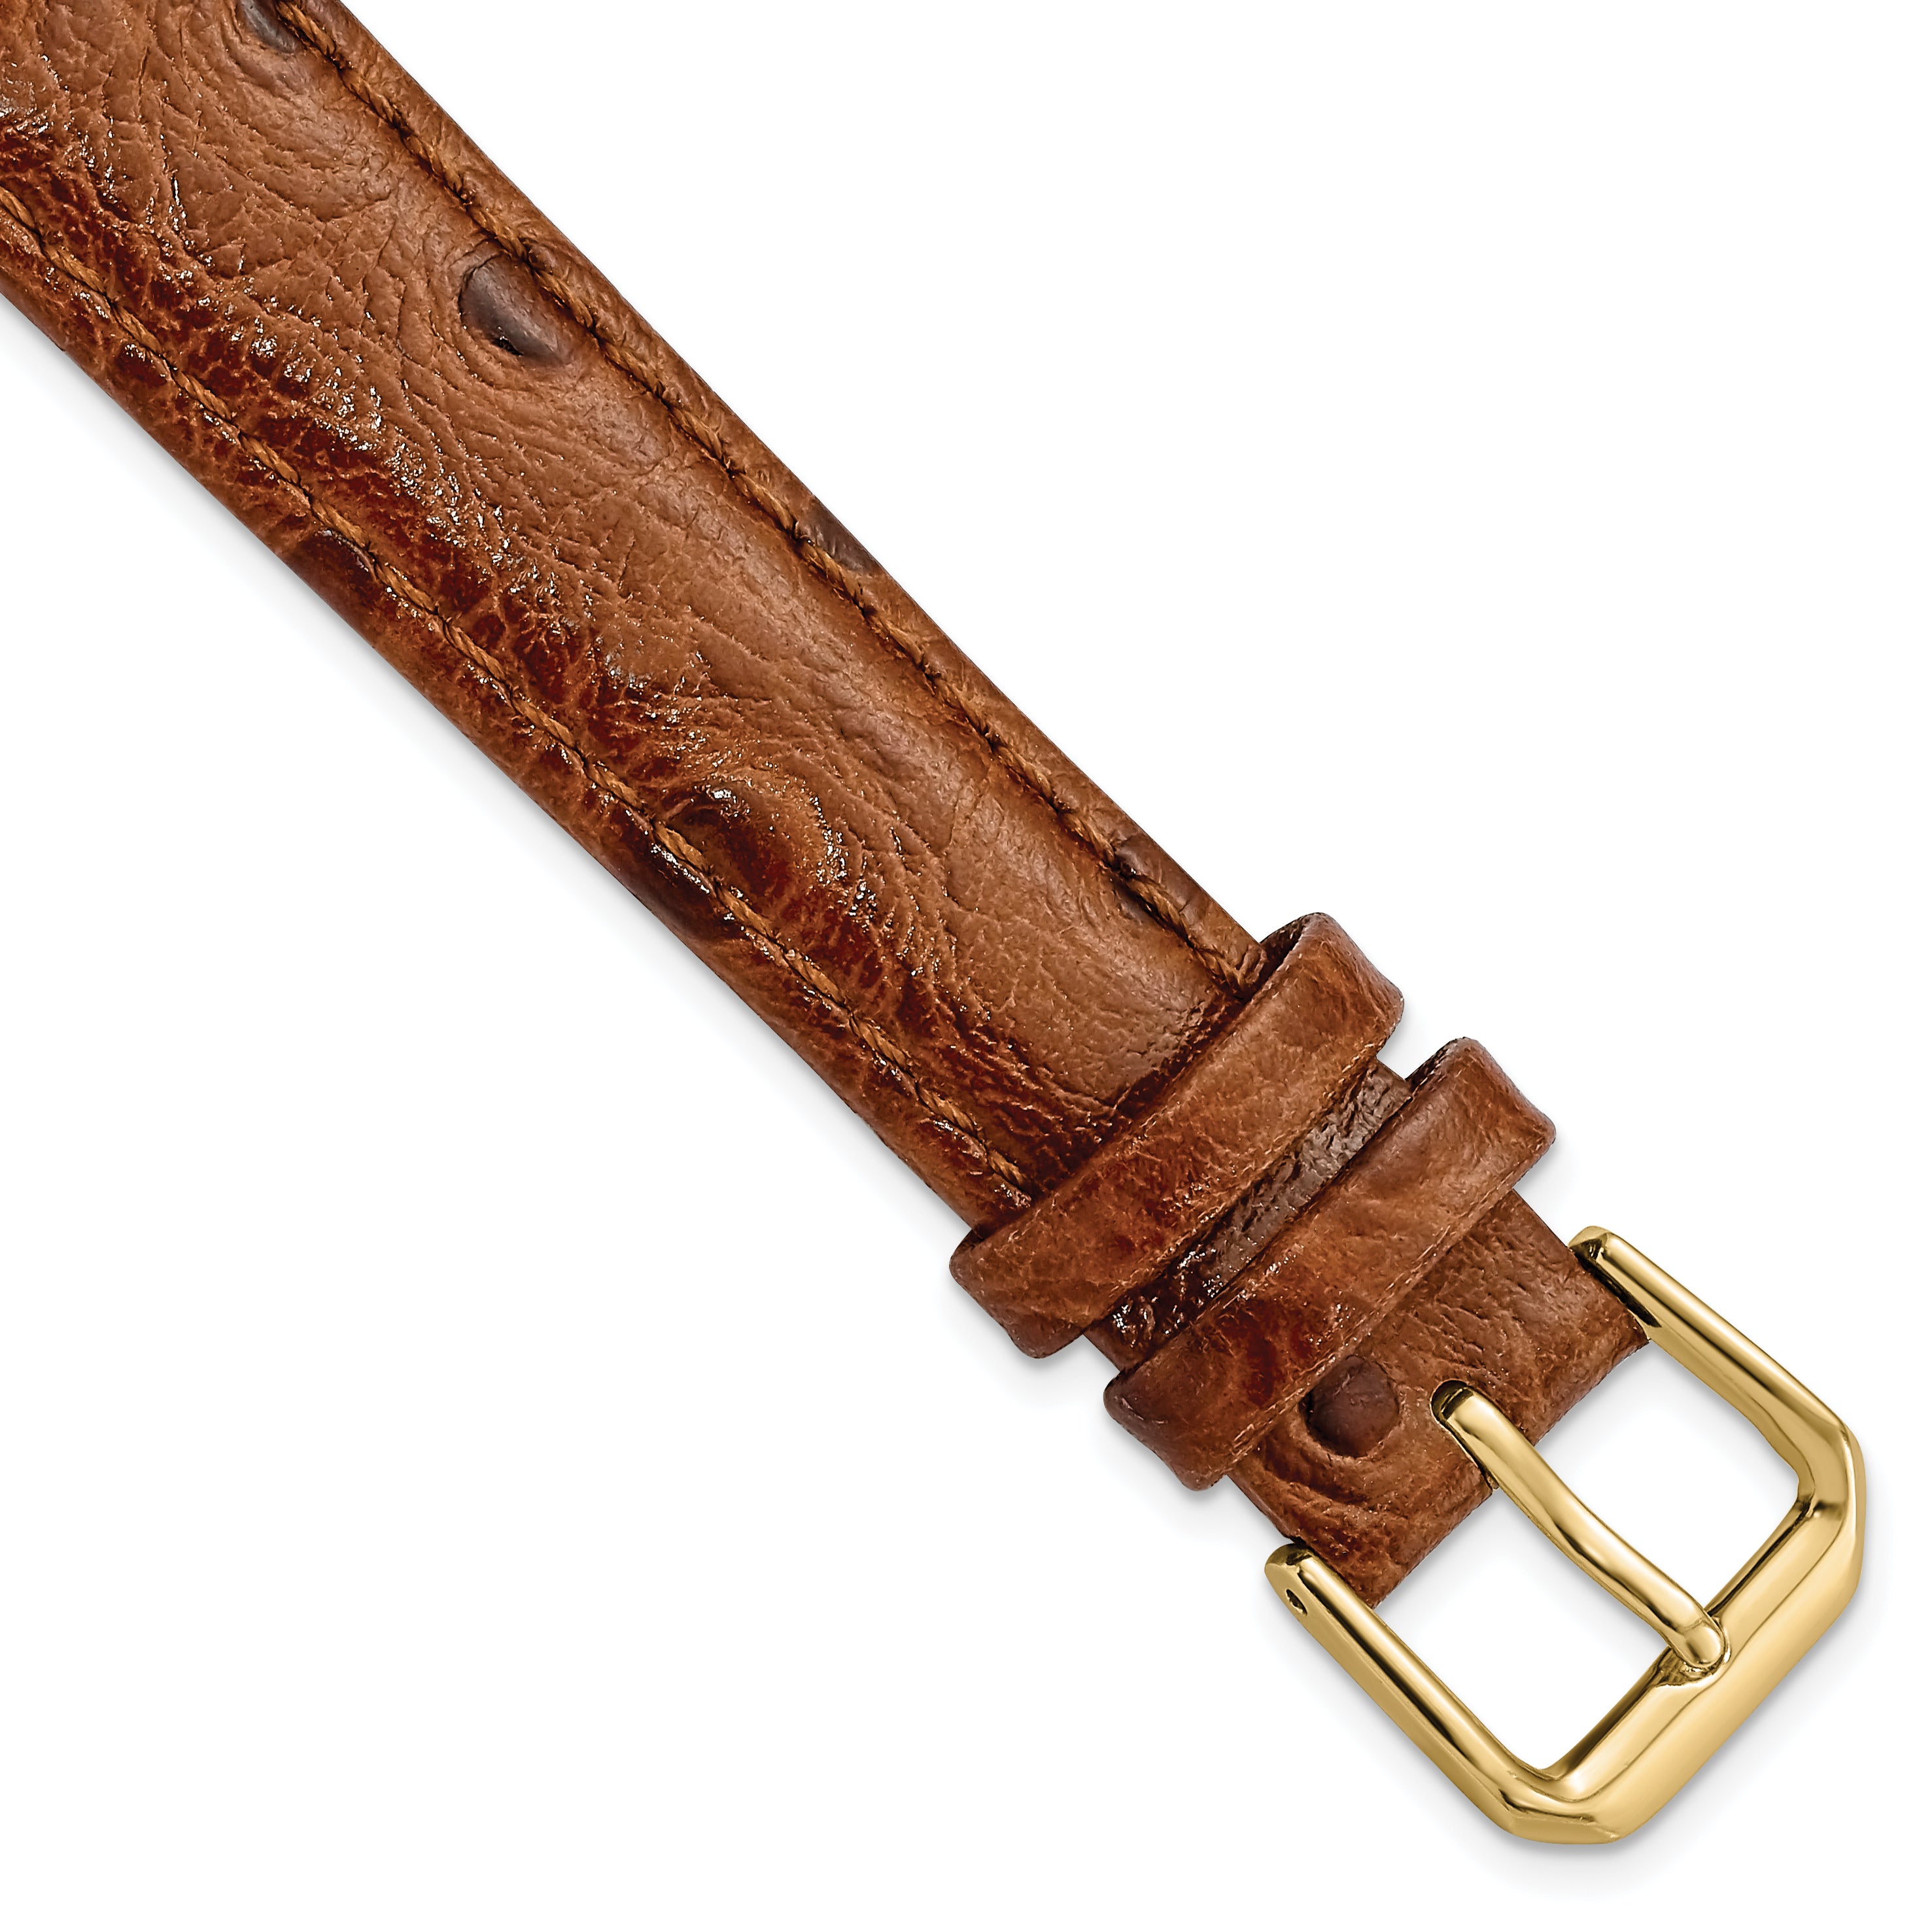 DeBeer 16mm Havana Ostrich Grain Leather with Gold-tone Buckle 7.5 inch Watch Band